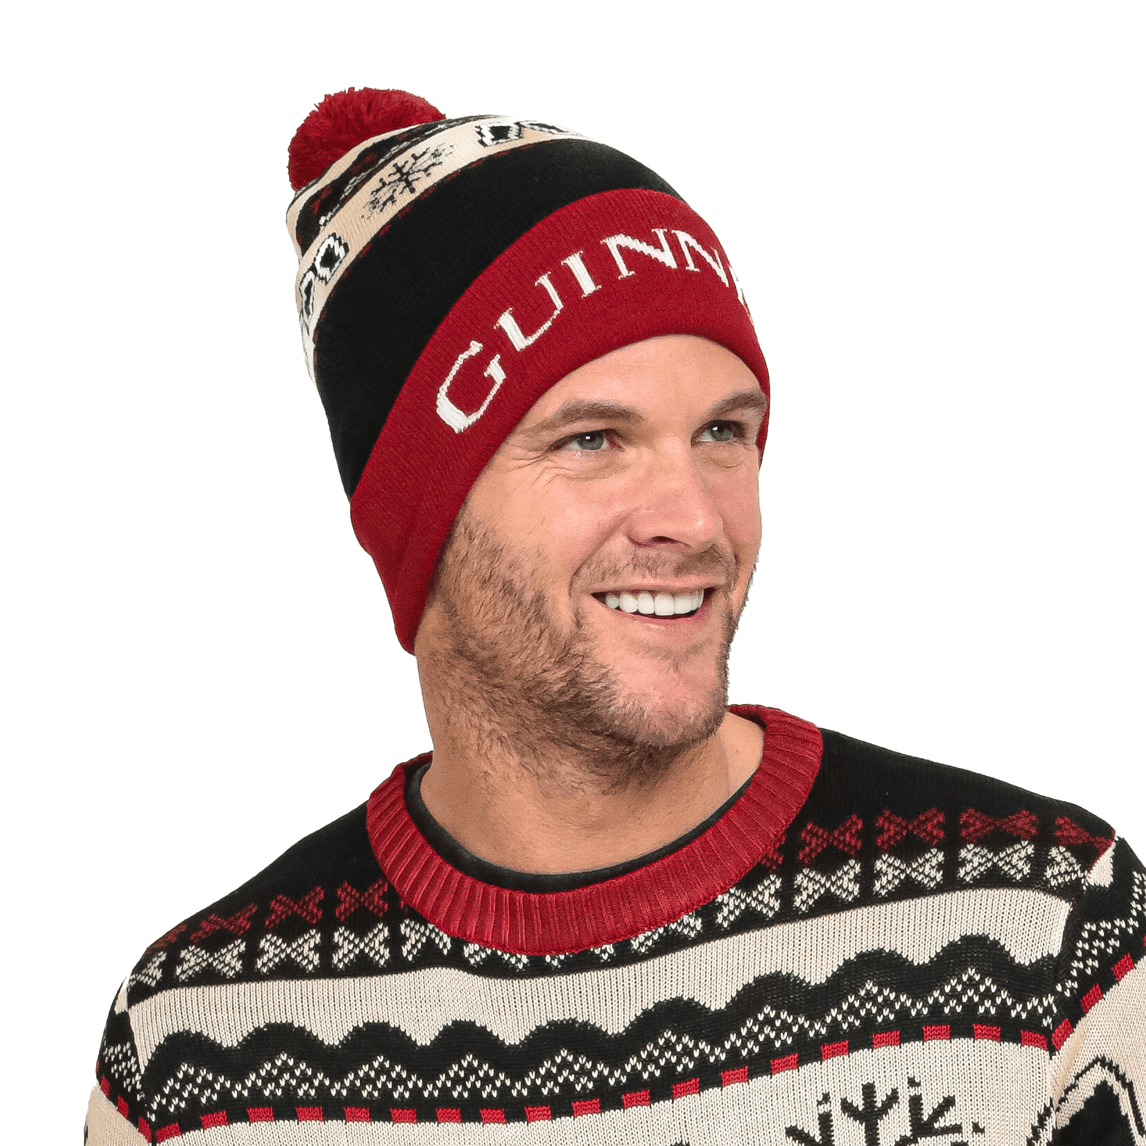 A man wearing an ugly sweater with a Guinness UK logo and snowflakes on it, paired with an Official Pint Winter Beanie.